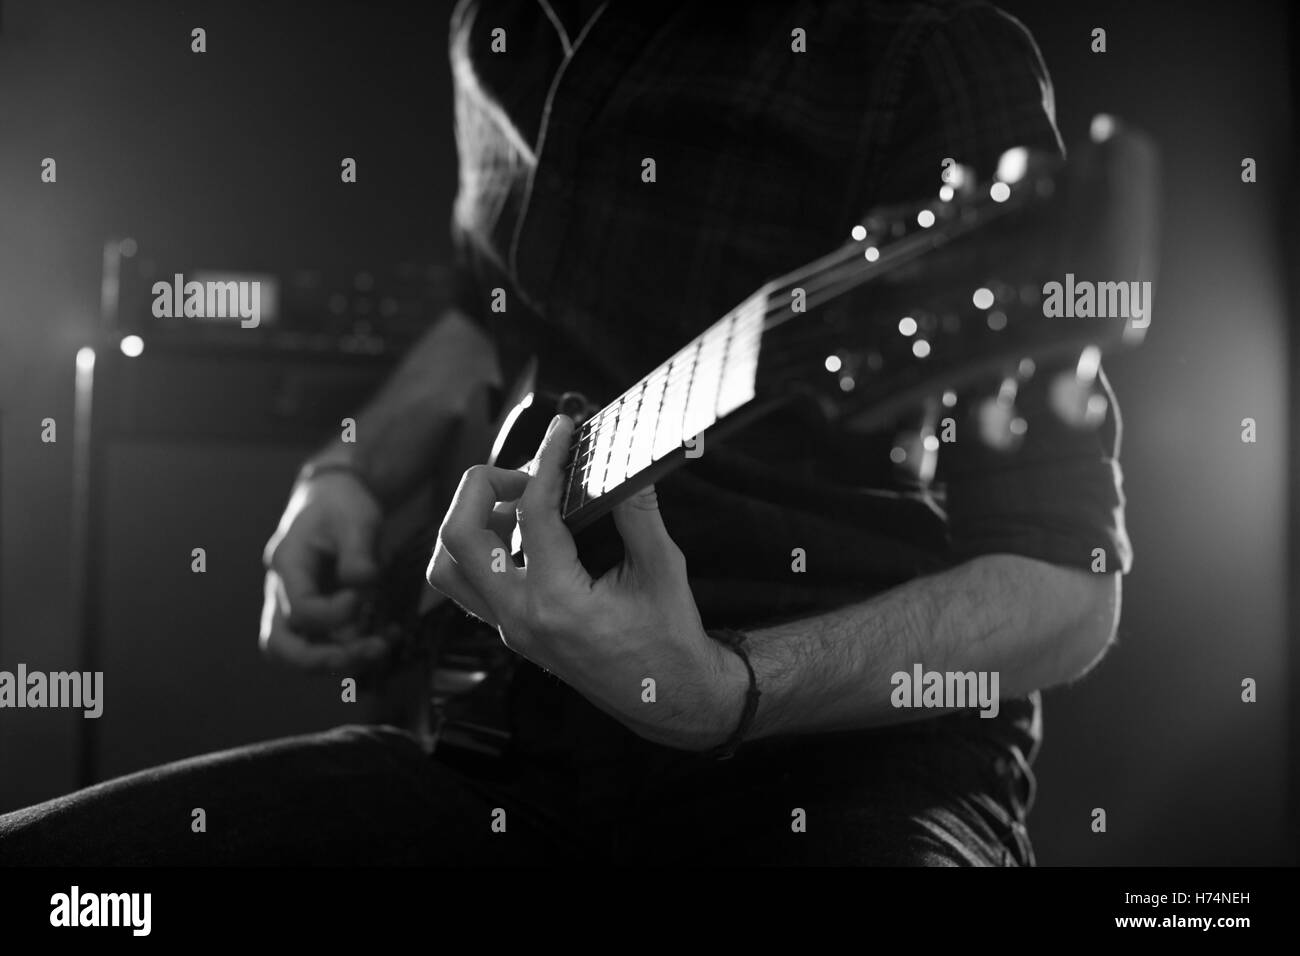 Close Up Of Man Playing Electric Guitar Shot In Monochrome Stock Photo